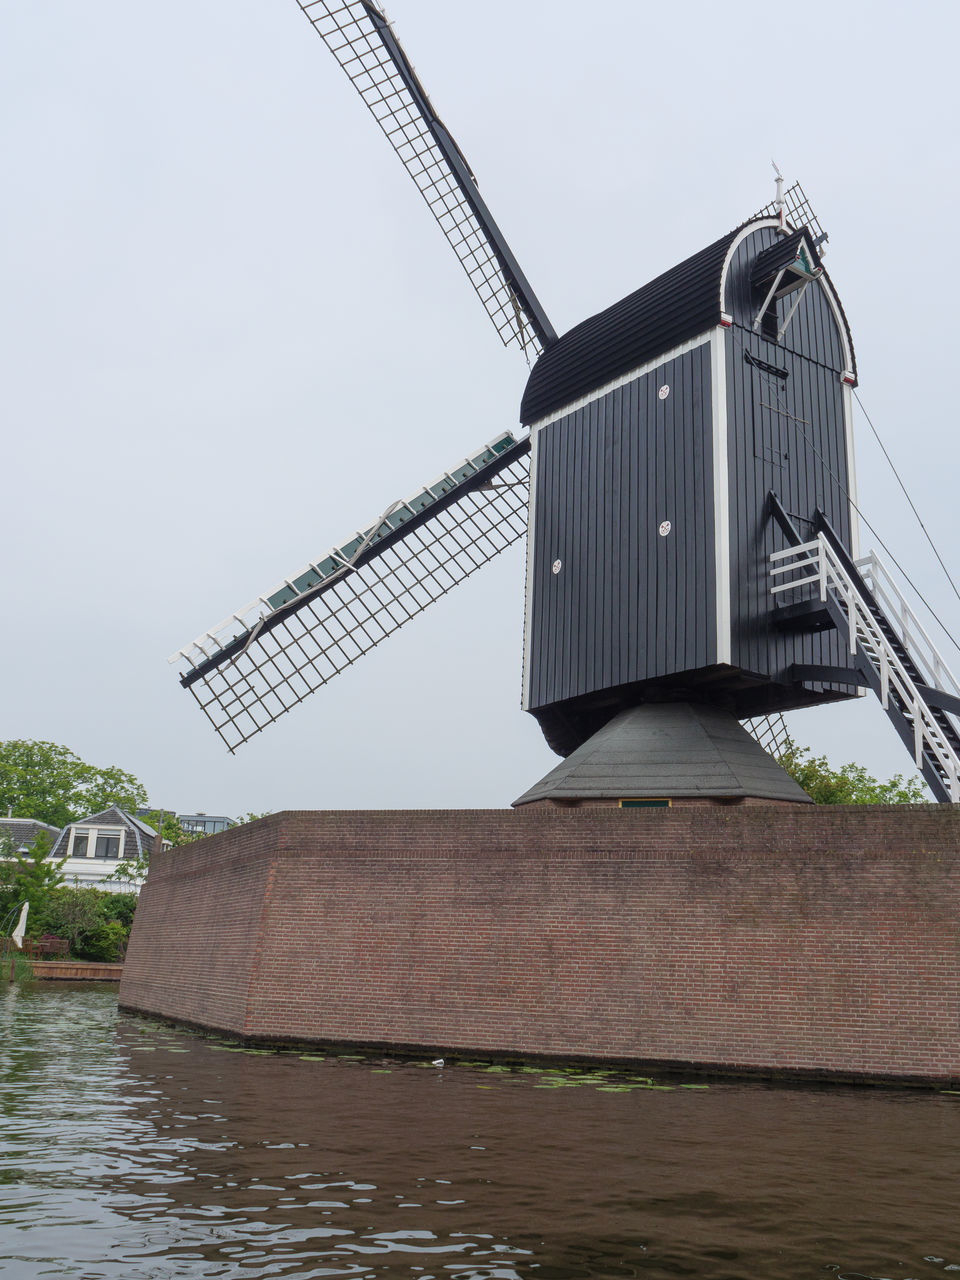 LOW ANGLE VIEW OF TRADITIONAL WINDMILL BY WATER AGAINST SKY